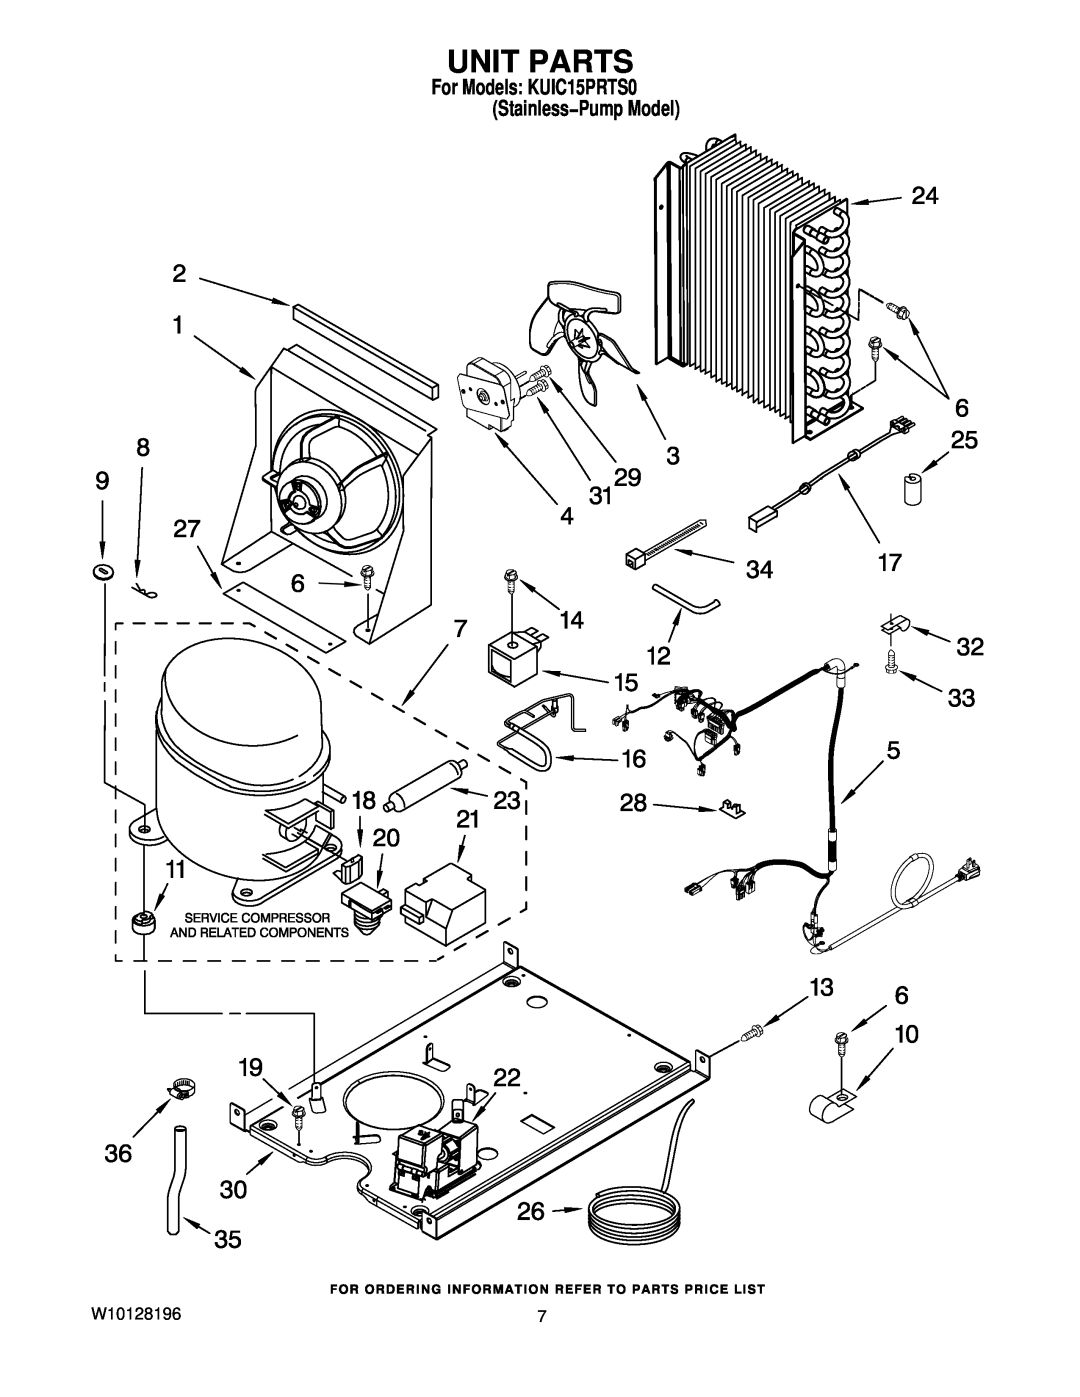 KitchenAid manual Unit Parts, W10128196, For Models KUIC15PRTS0 Stainless−Pump Model 